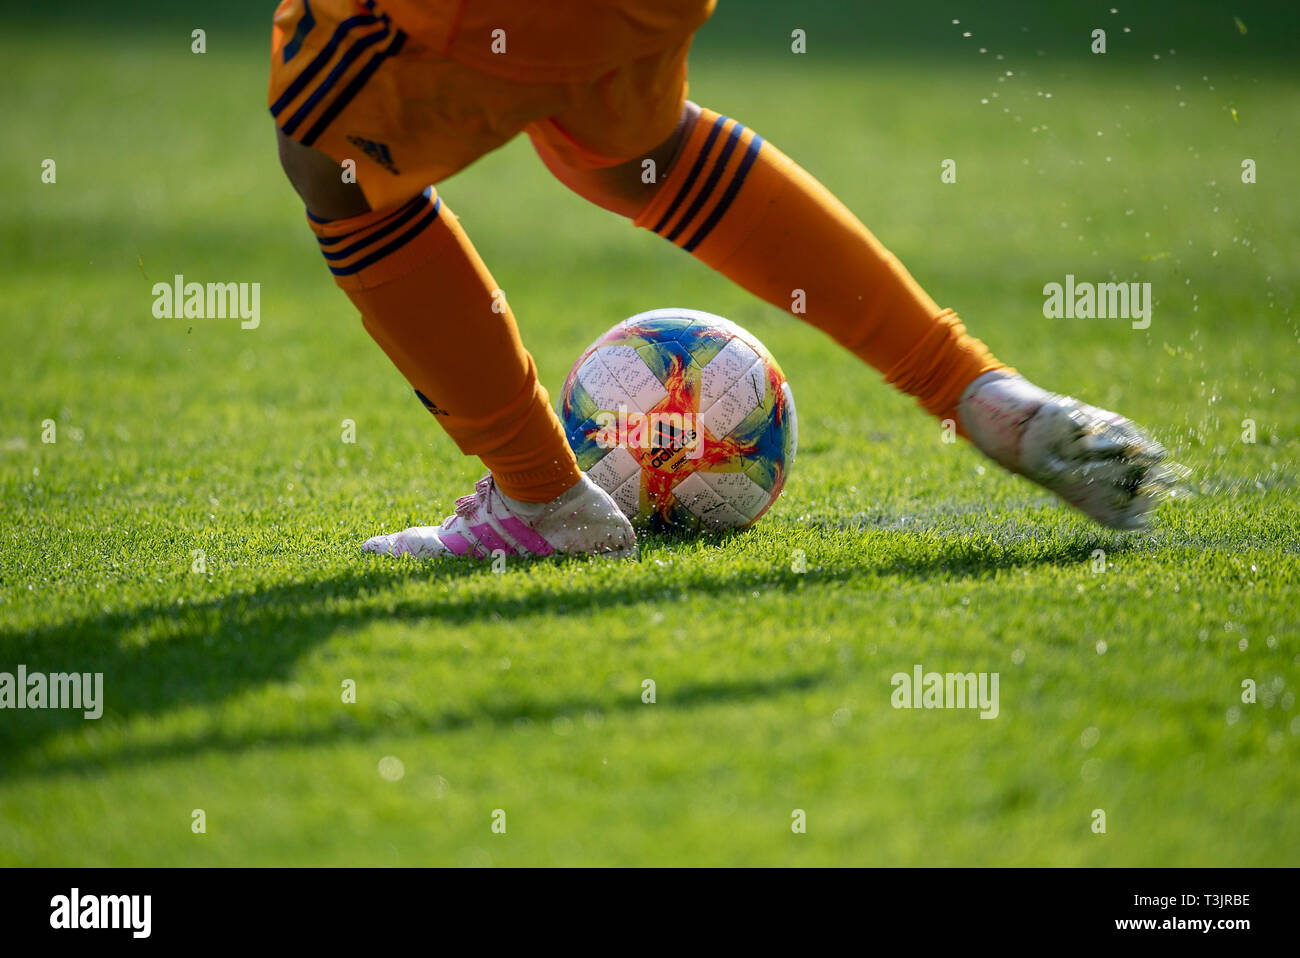 Paderborn, Germany. 09th Apr, 2019. Women's Official Women's Football World  Cup 2019 in France, goalkeeper at the tee, legs, Adidas Conext Ball, shoes, football  boots with pink stripes. Soccer National Team Women